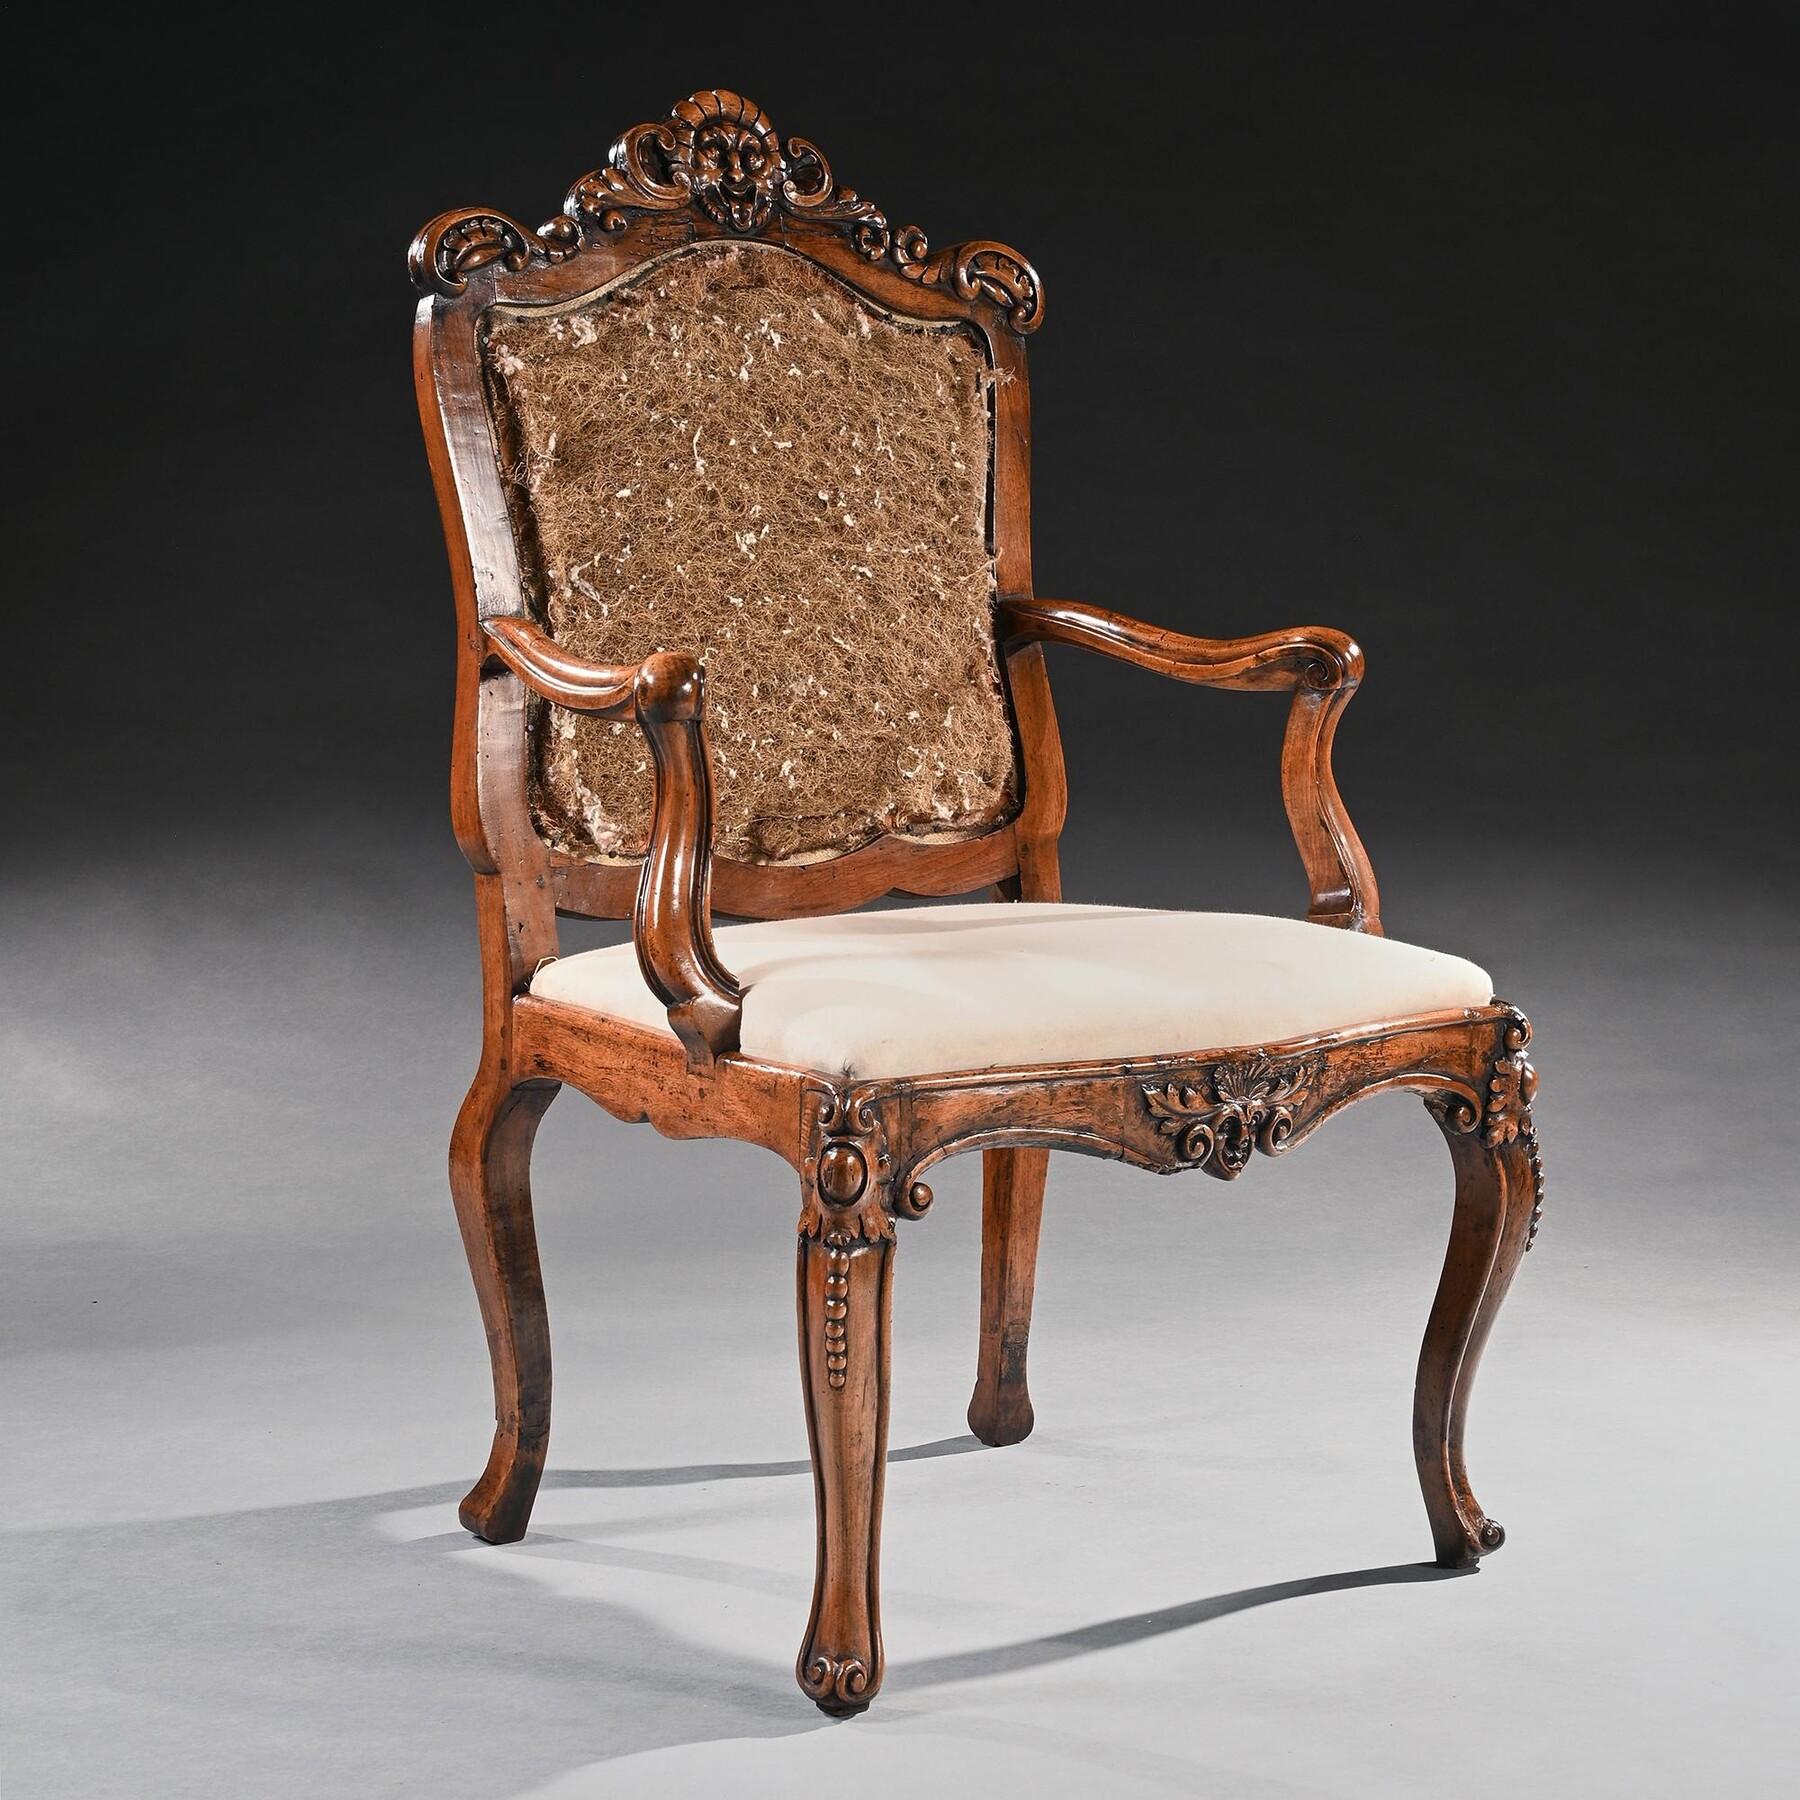 Mid 18th Century Italian Rococo Armchair in Walnut With Extravagantly Carved For Sale 4